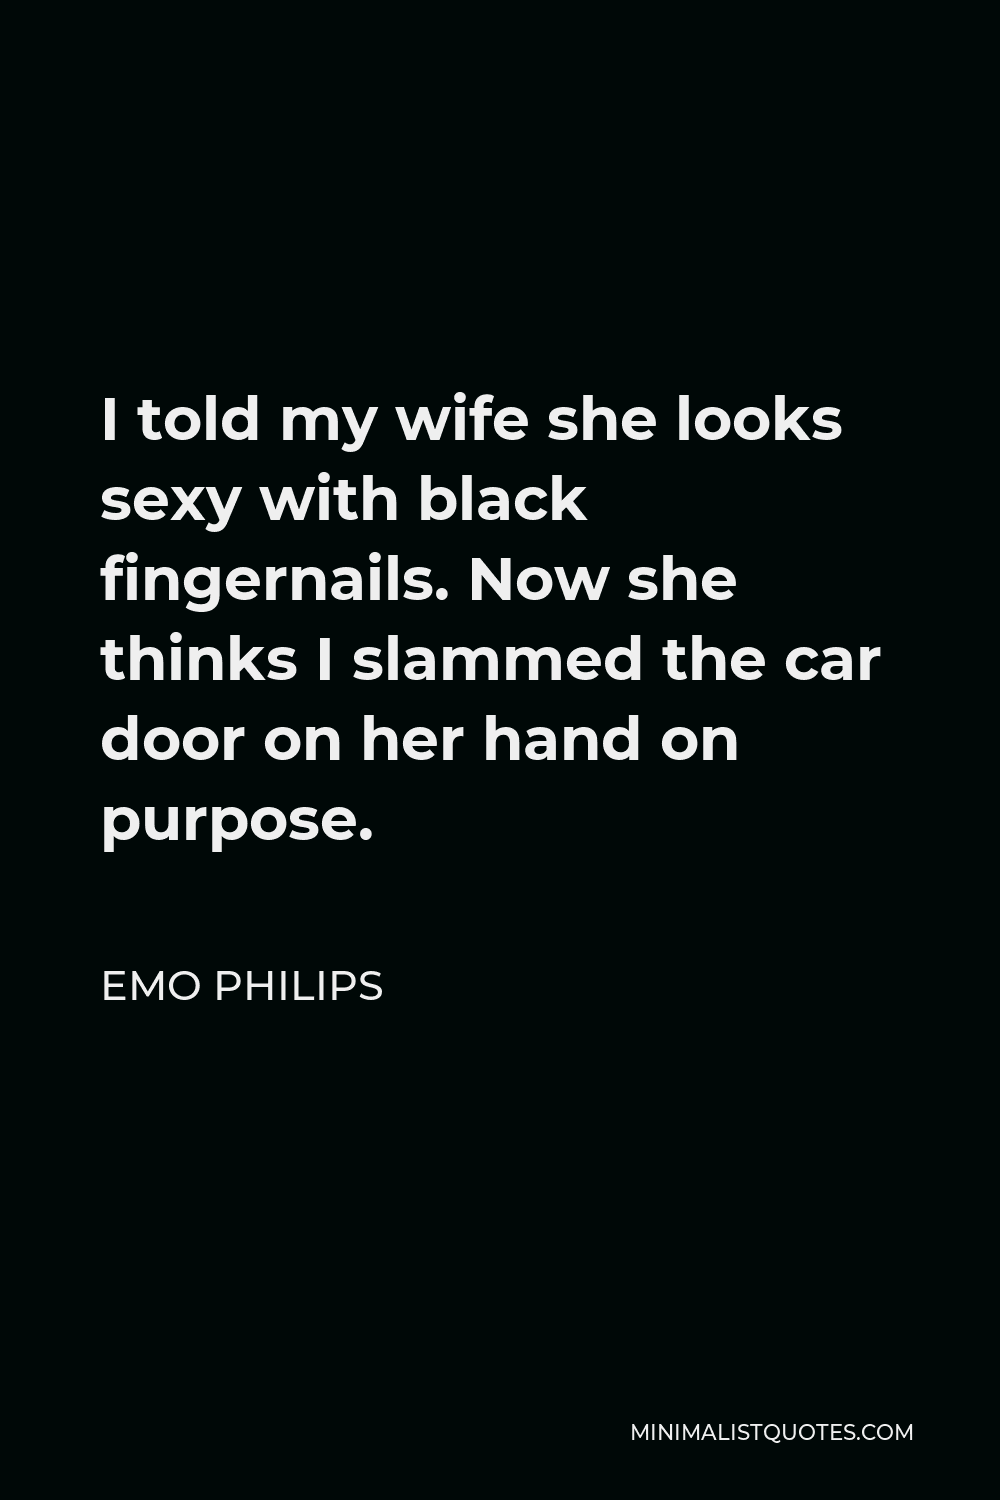 Emo Philips Quote - I told my wife she looks sexy with black fingernails. Now she thinks I slammed the car door on her hand on purpose.